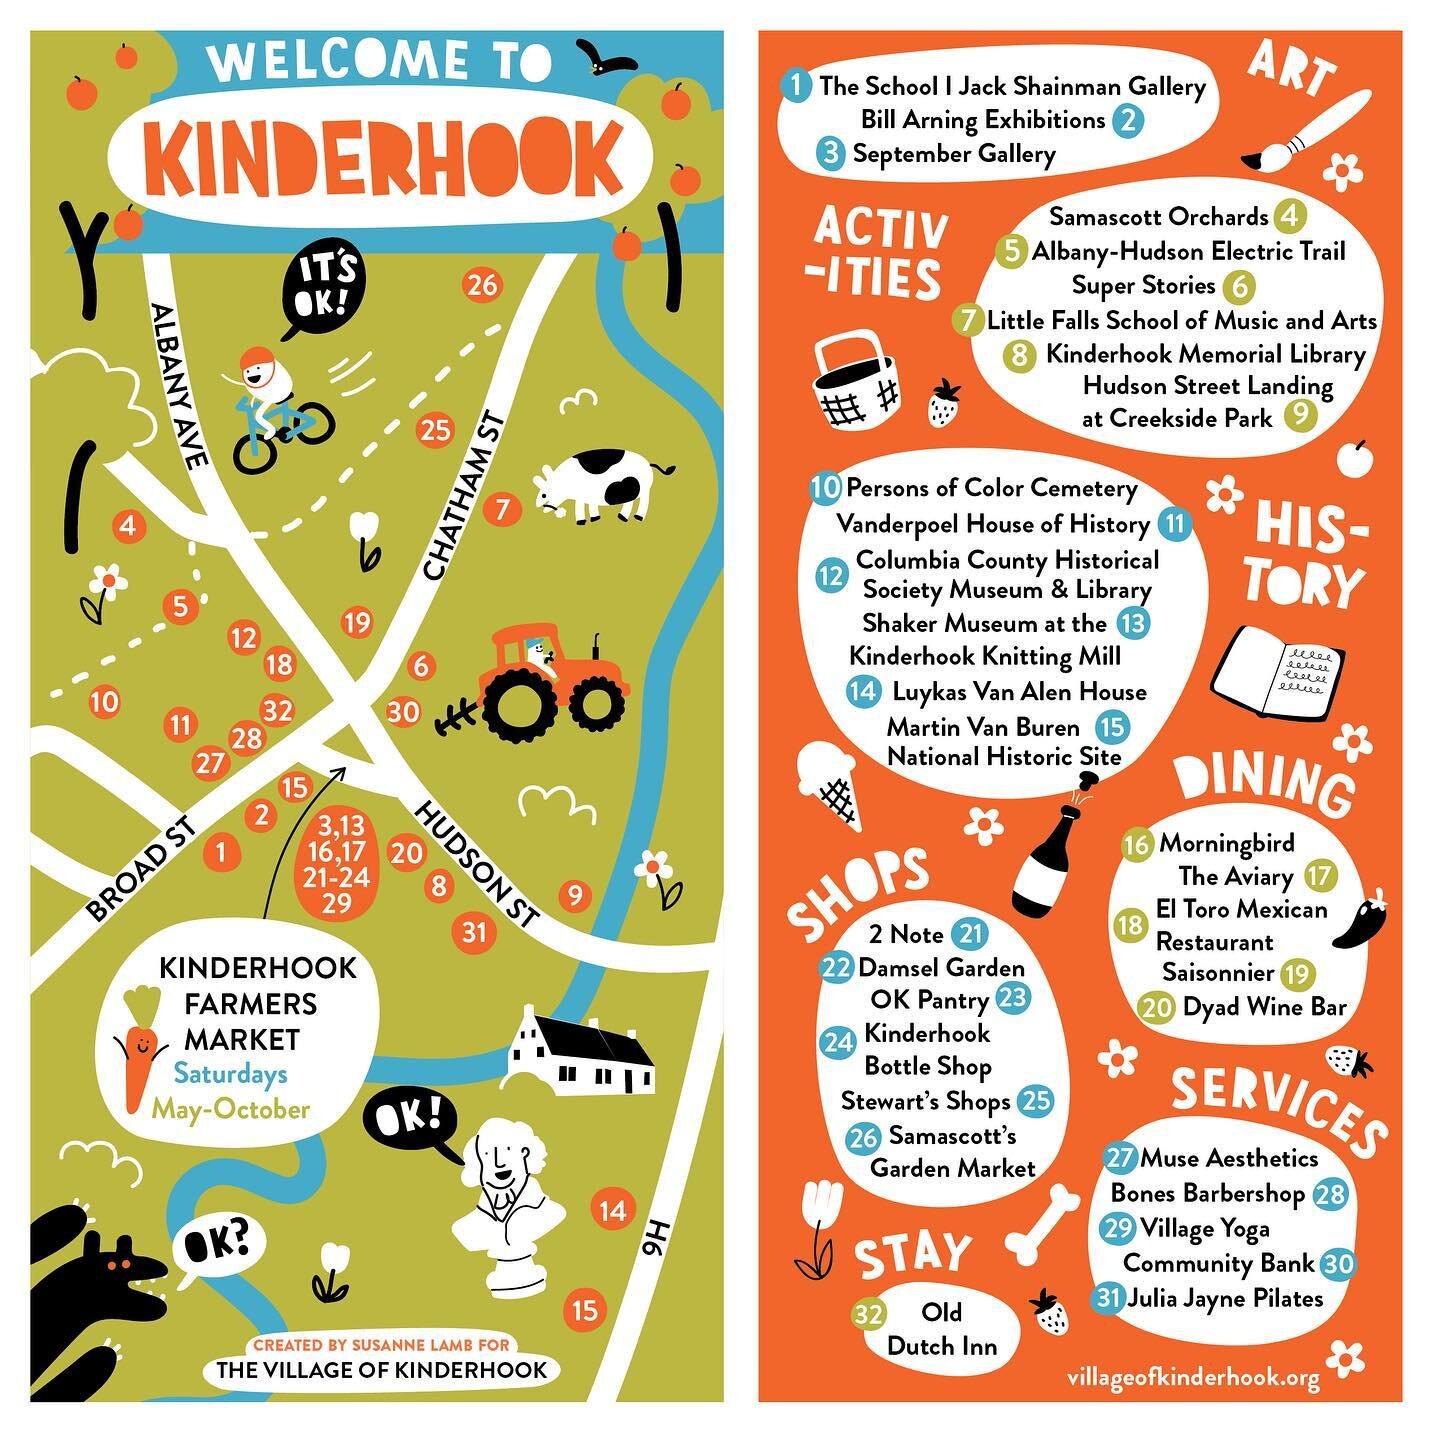 I had such a fun time making the rack card for the lovely little @villageofkinderhook and it&rsquo;s been even more fun seeing it out around the village in all my favorite spots! 🤗 Thanks @okvillage for the opportunity! 🧡